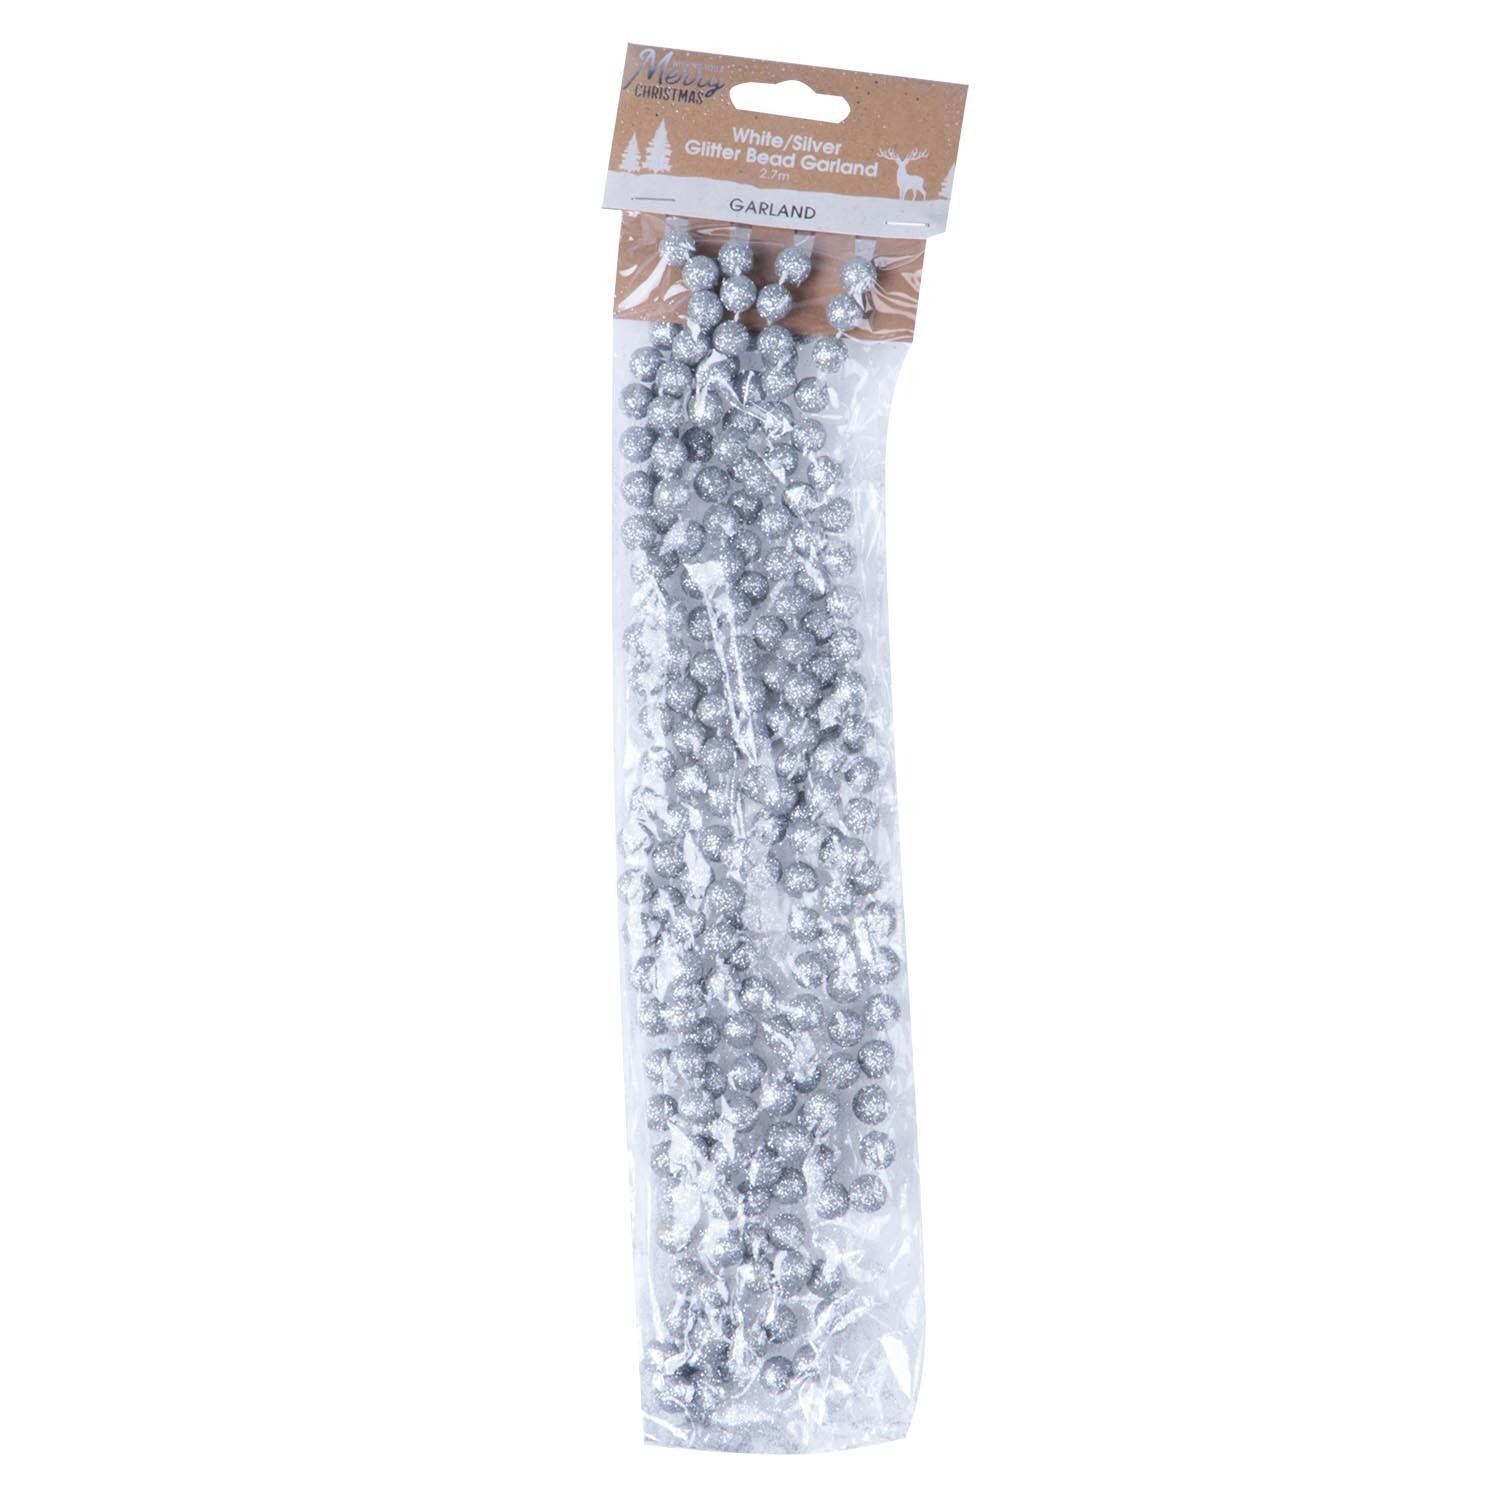 2.7M White Glitter or Silver Bead Garland Image 1